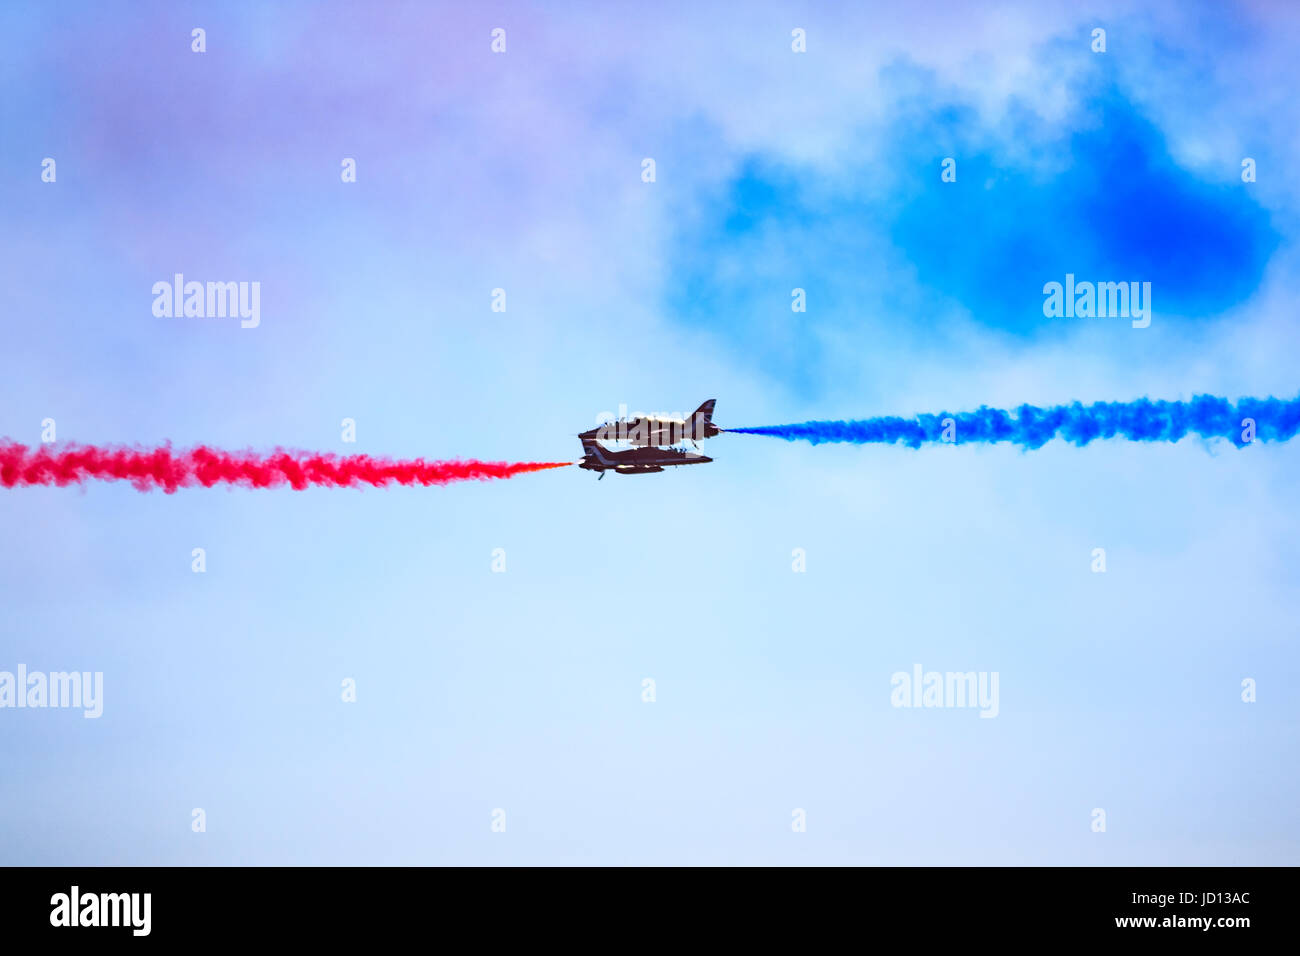 Weston-Super-Mare, England, UK. 17th June, 2017. RAF Red Arrows perform perilously close, head on pass at Weston Air Festival. Credit: Hannah Vineer/Alamy Live News. Stock Photo